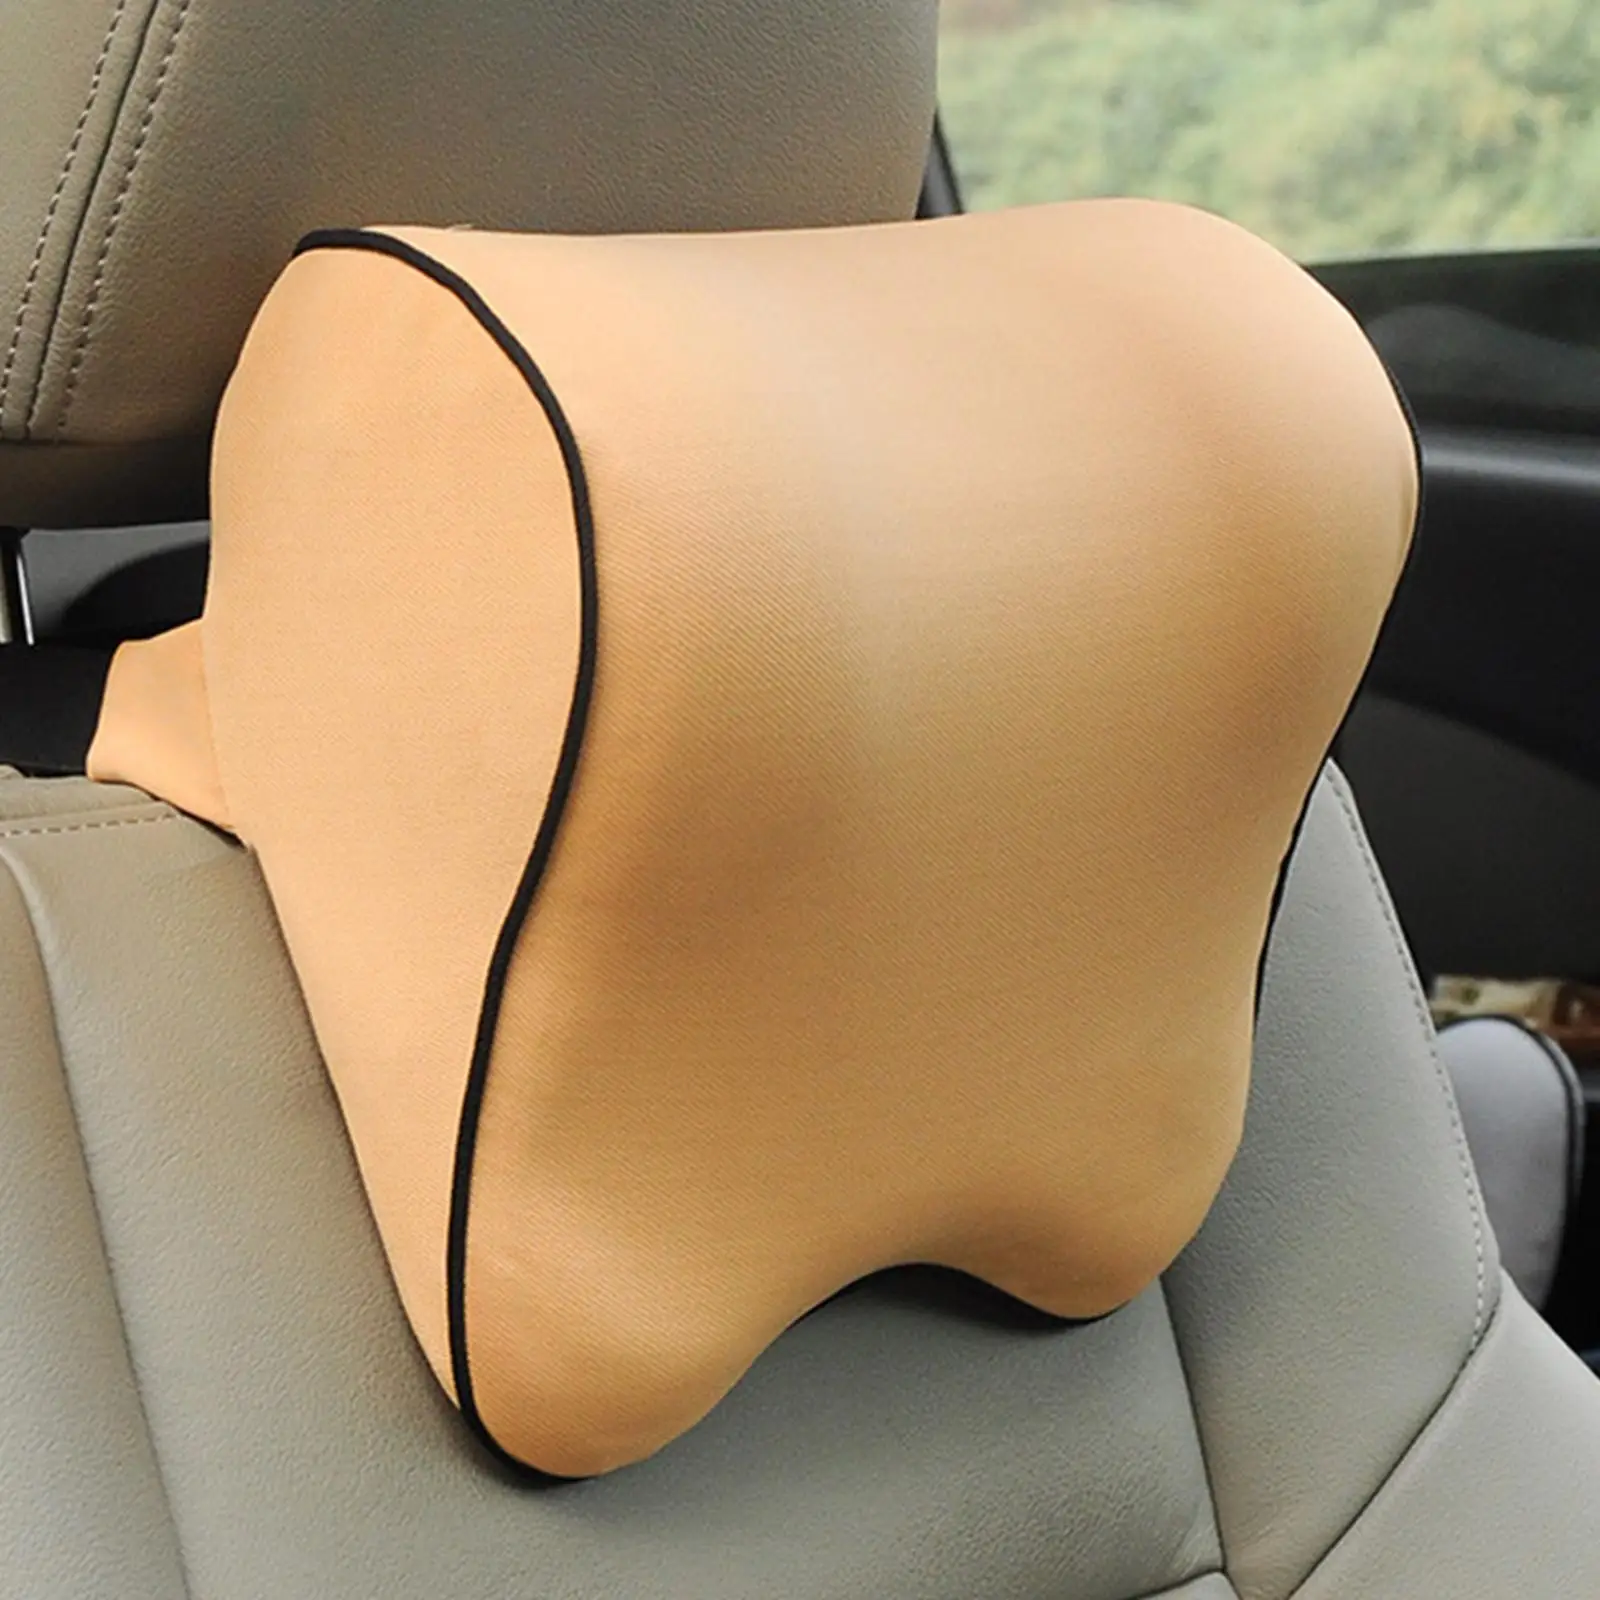 car Neck Pillow Cervical Support Breathable Removable covers Headrest Cushion for SUV Auto Travelling Driving